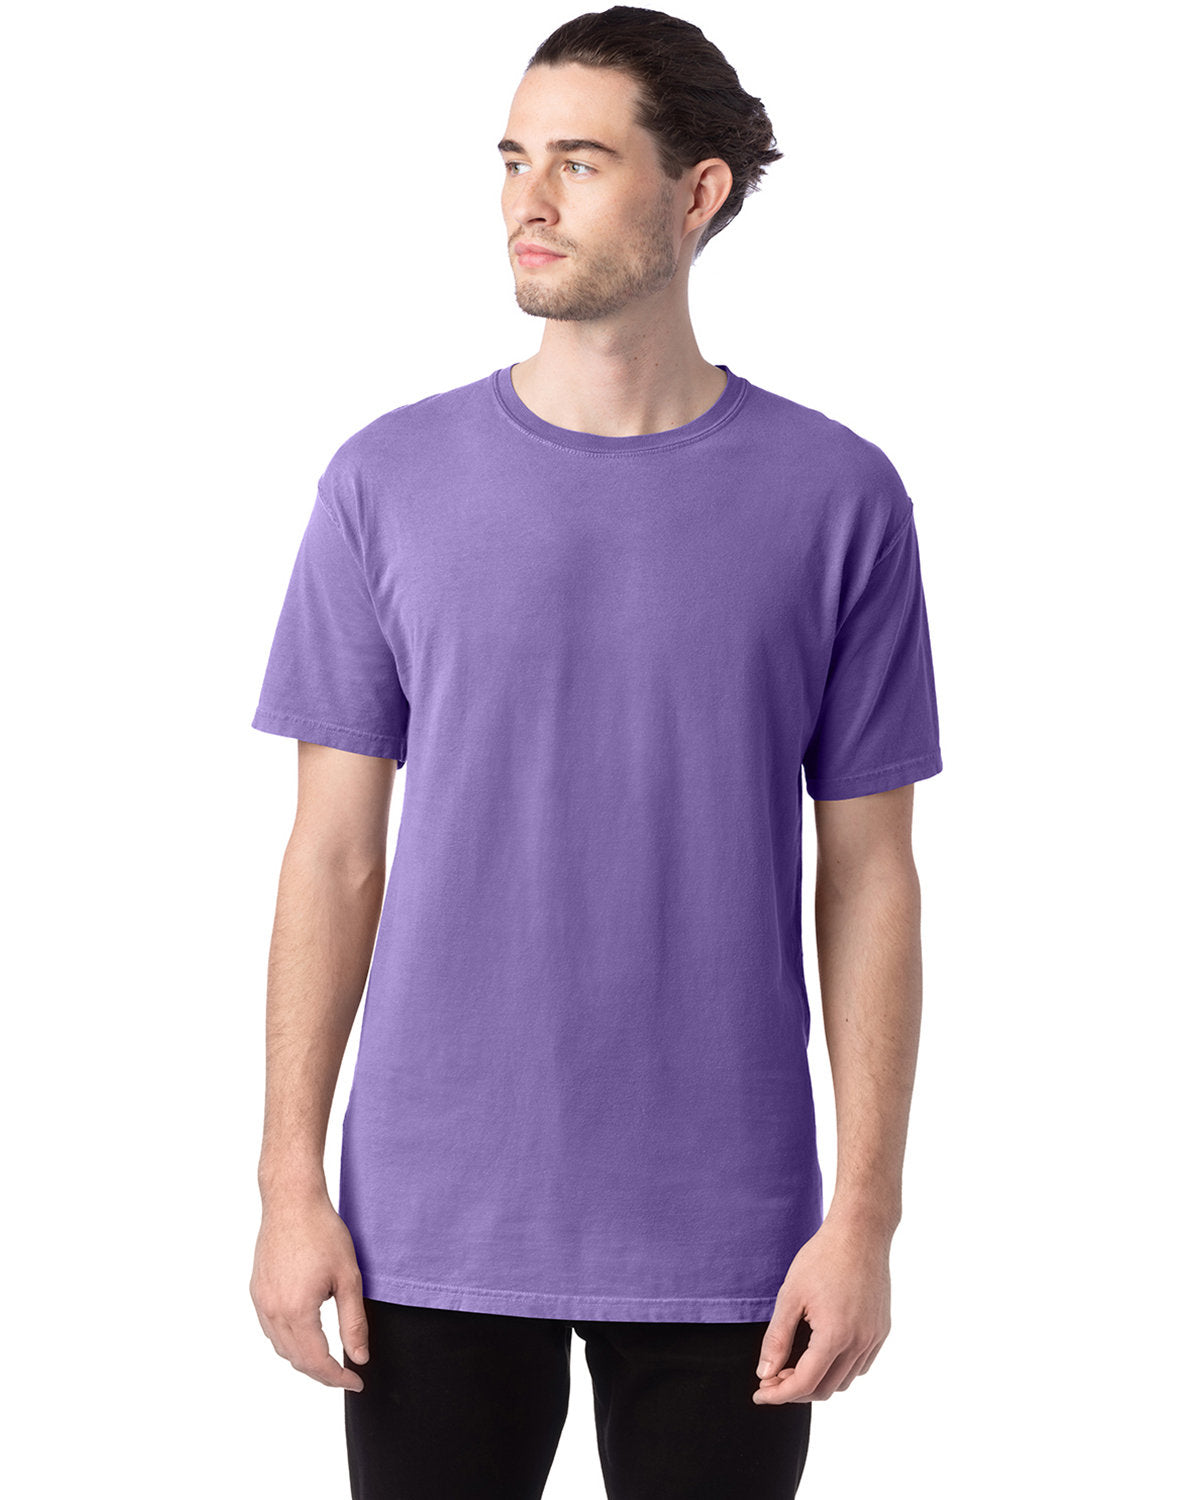 GDH100-CWH-87-LAVENDER-XS